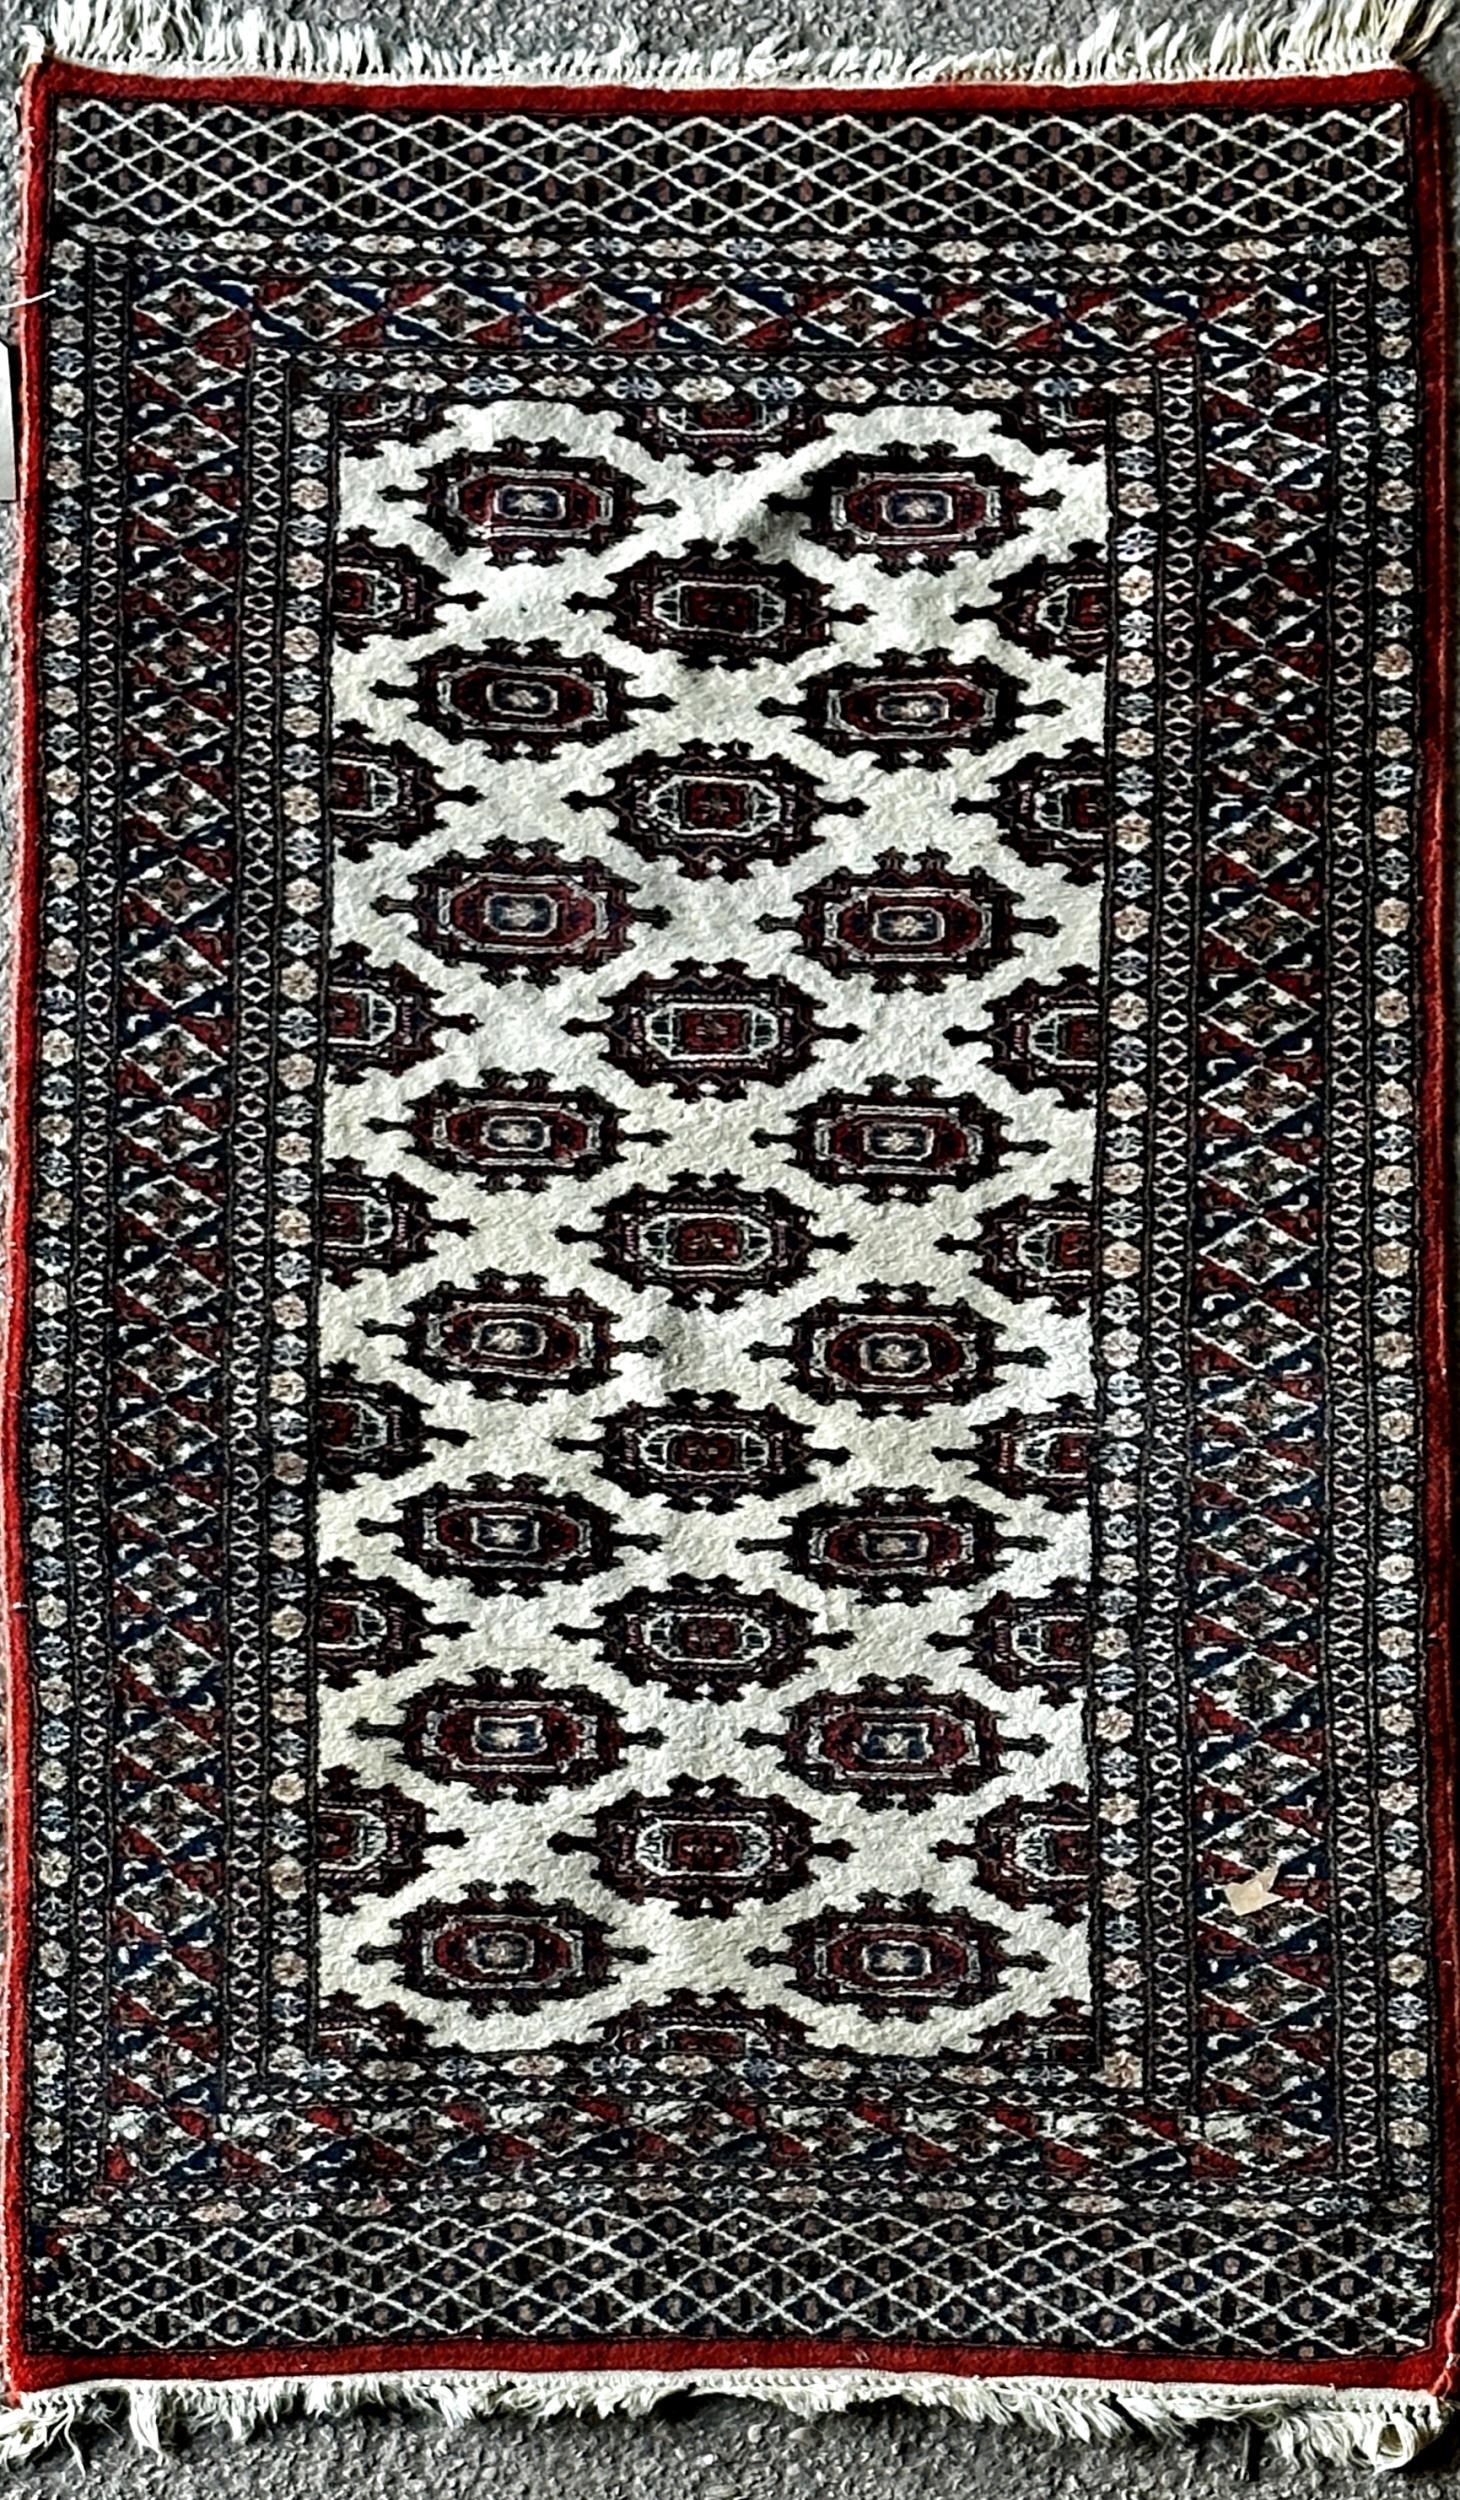 Bokhara rug with typical geometric medallion decoration on a cream ground, 175 x 195cm